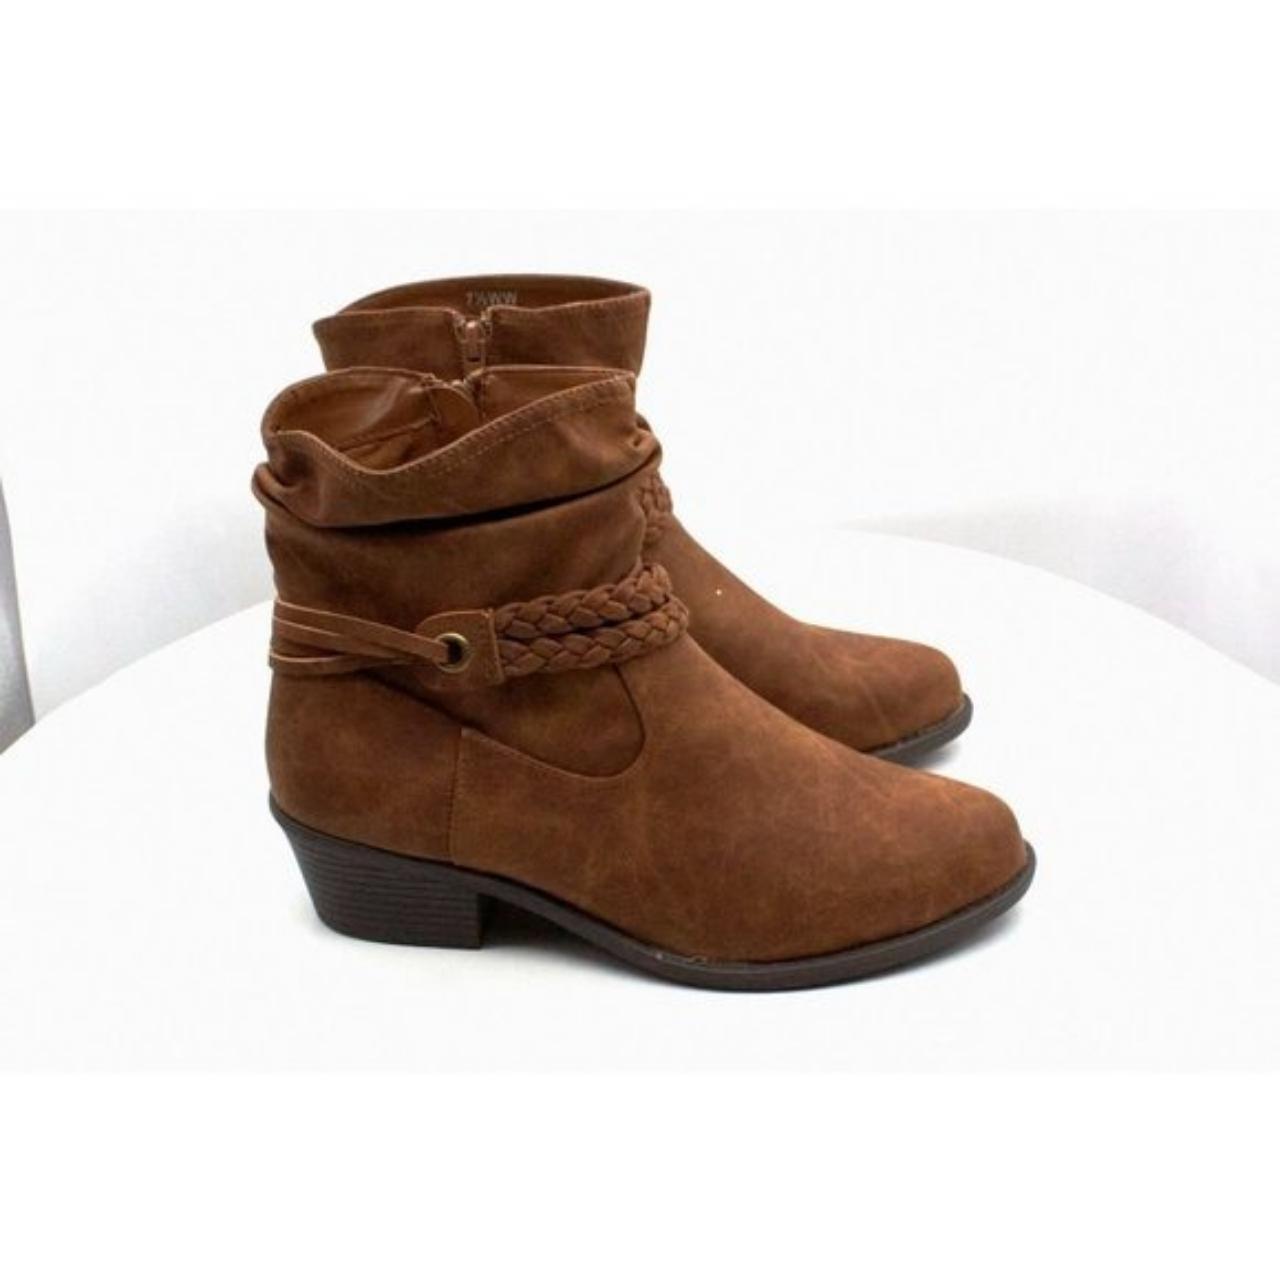 Product Image 4 - Easy Street Women's Shire Booties